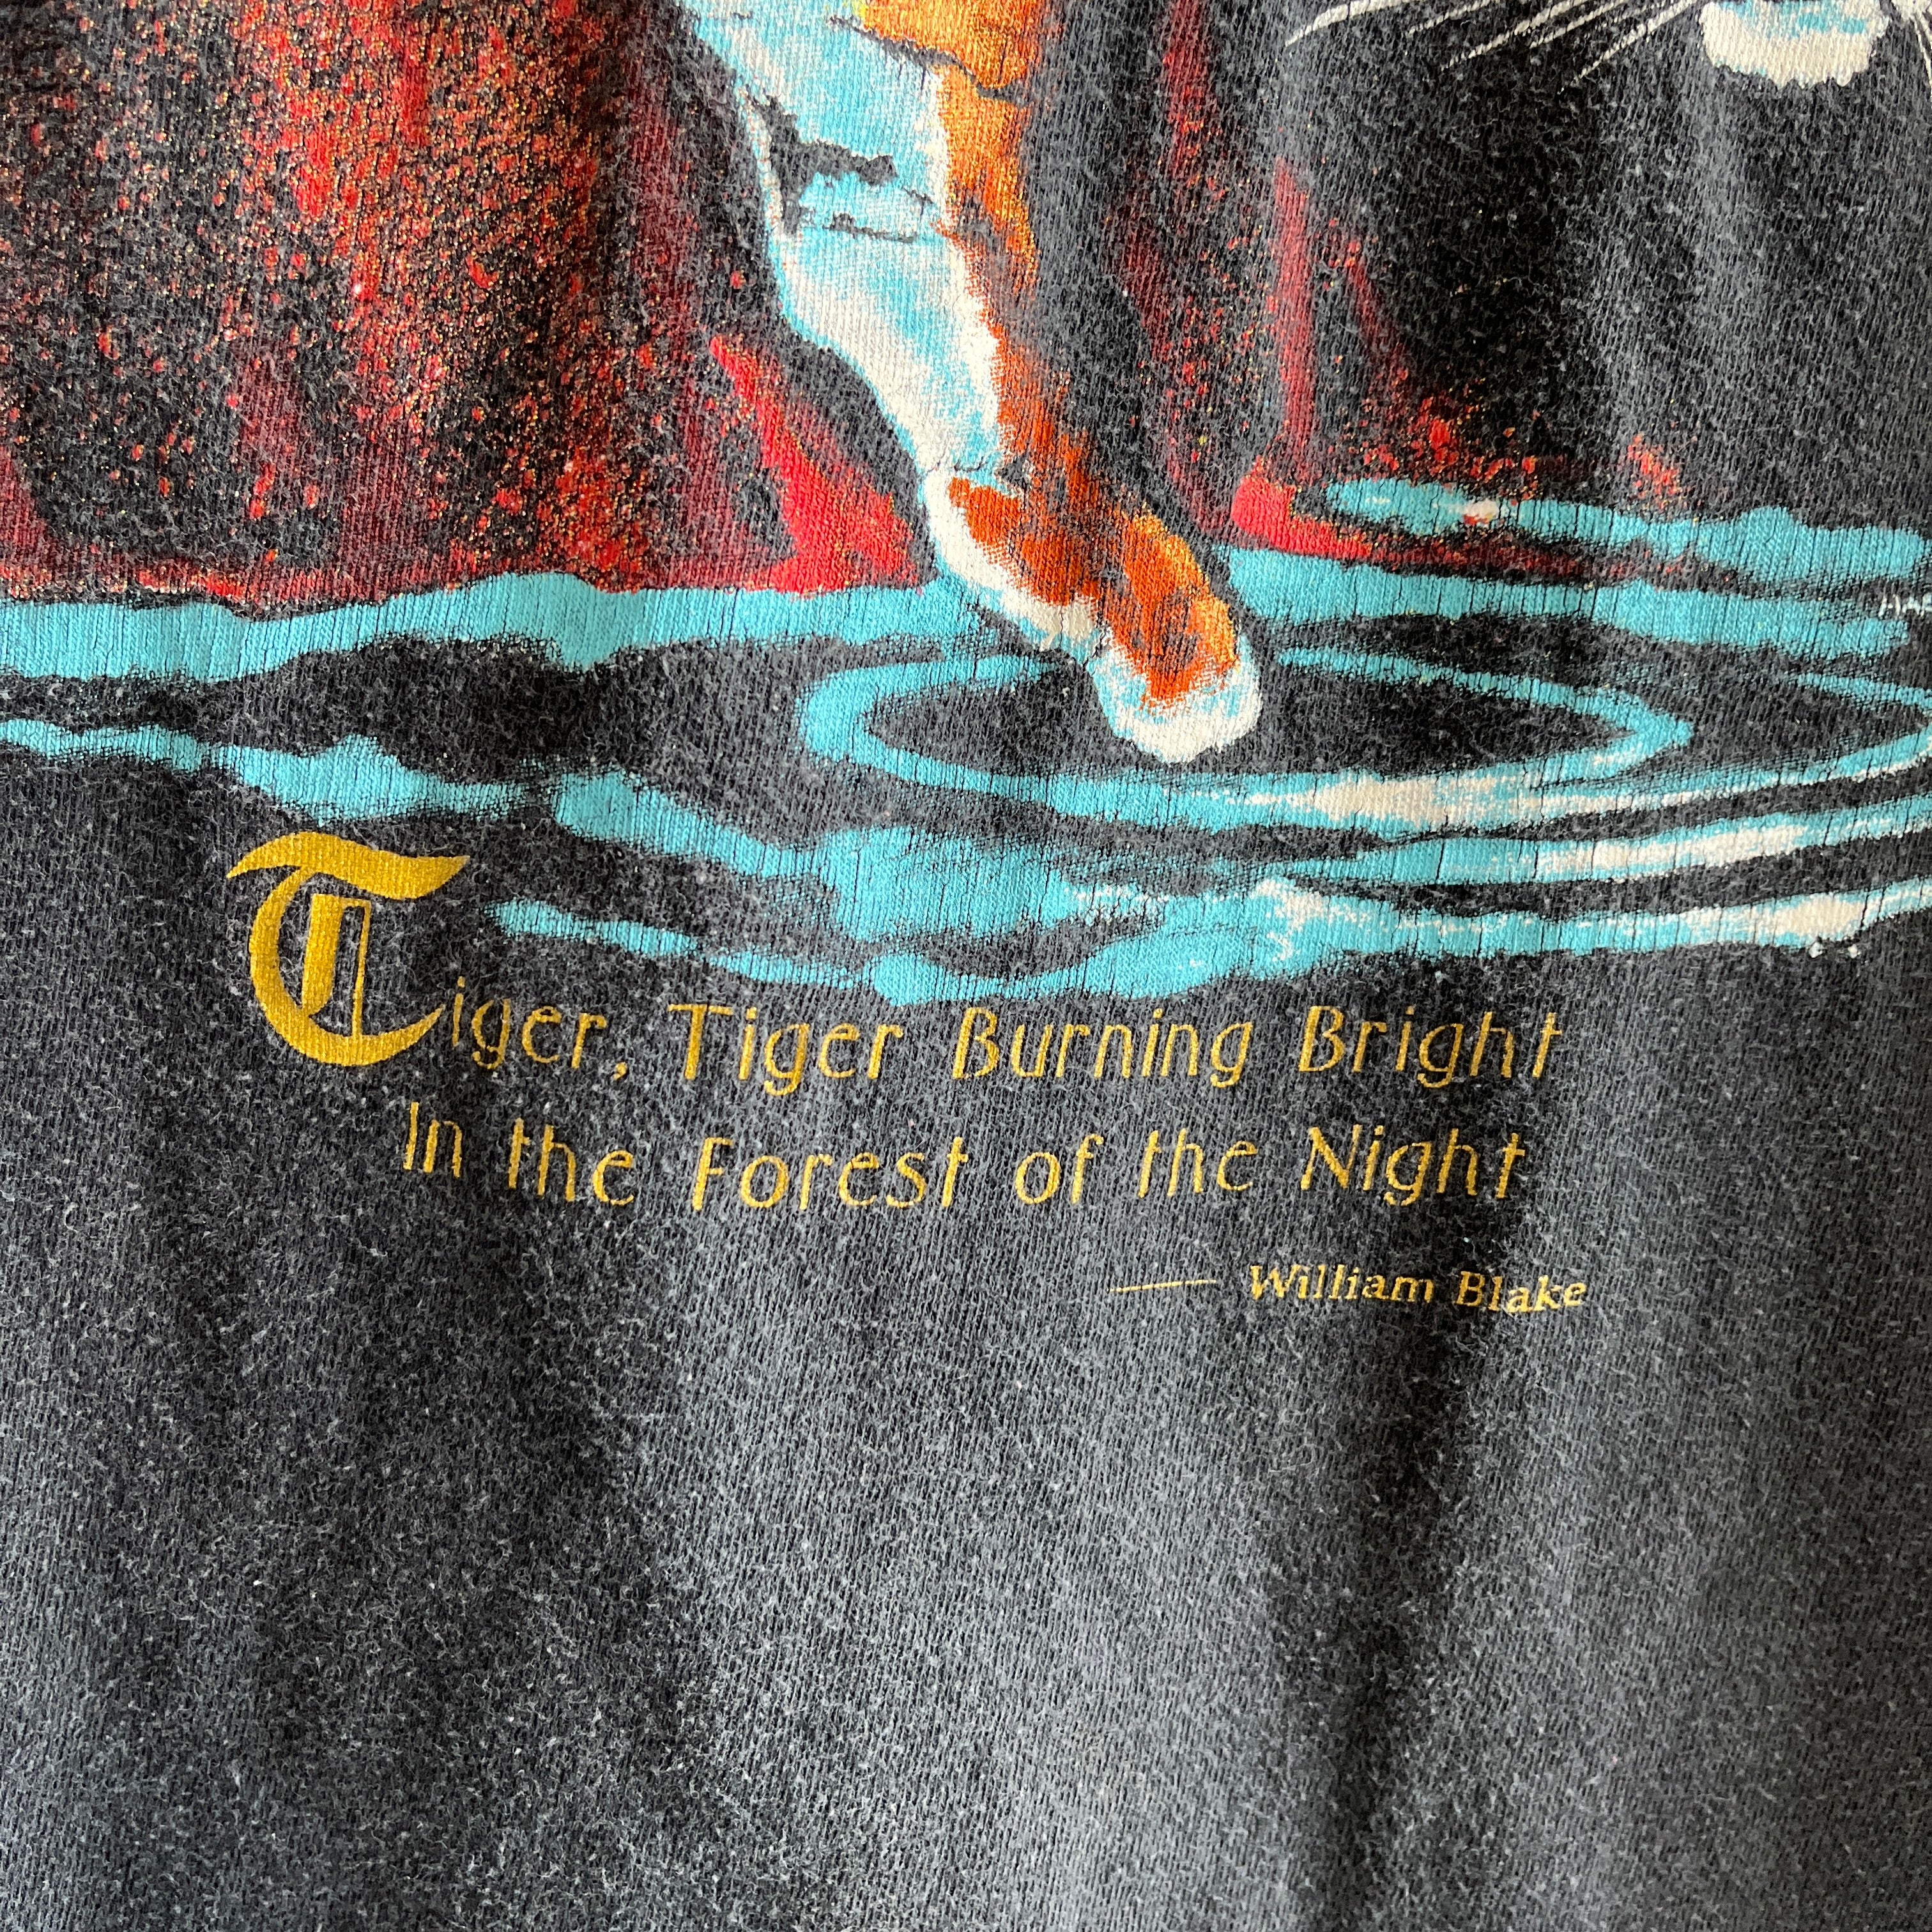 1990 Tiger Harlequin Tiger T-Shirt with A William Blake Quote - Magnificent!!!